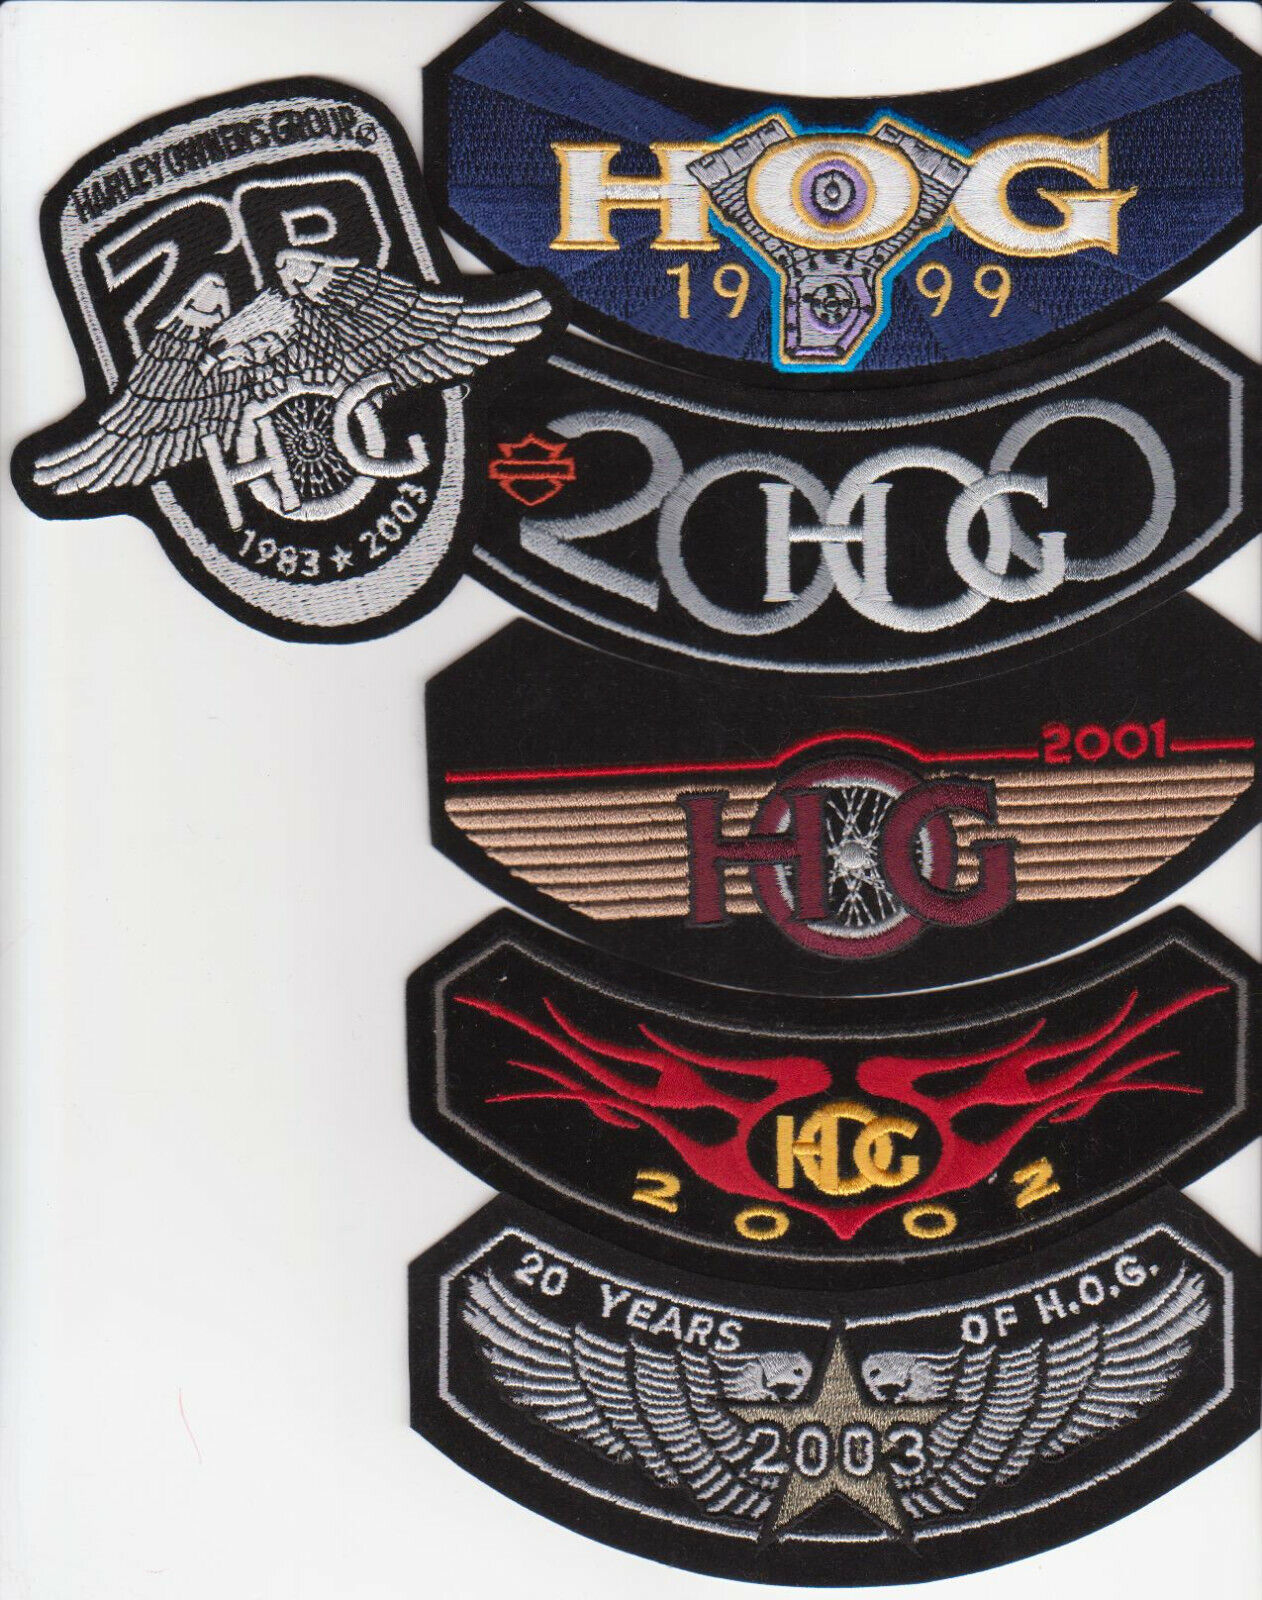 HOG 1999, 2000, 2001, 2002, 2003 & 20th Anniversary patches HARLEY OWNERS GROUP